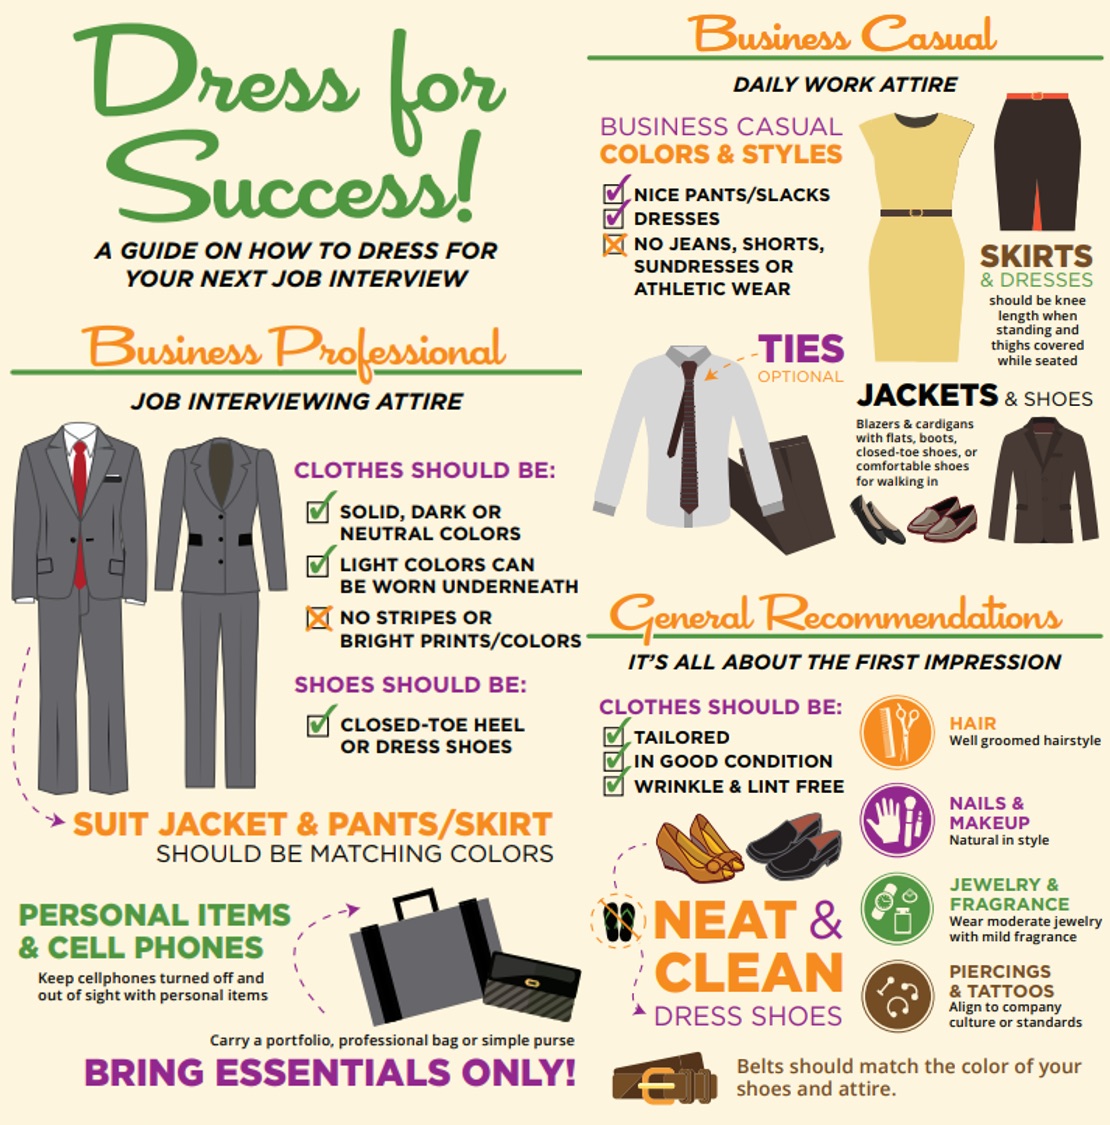 Knowing how to 'dress for success' can aid students while entering